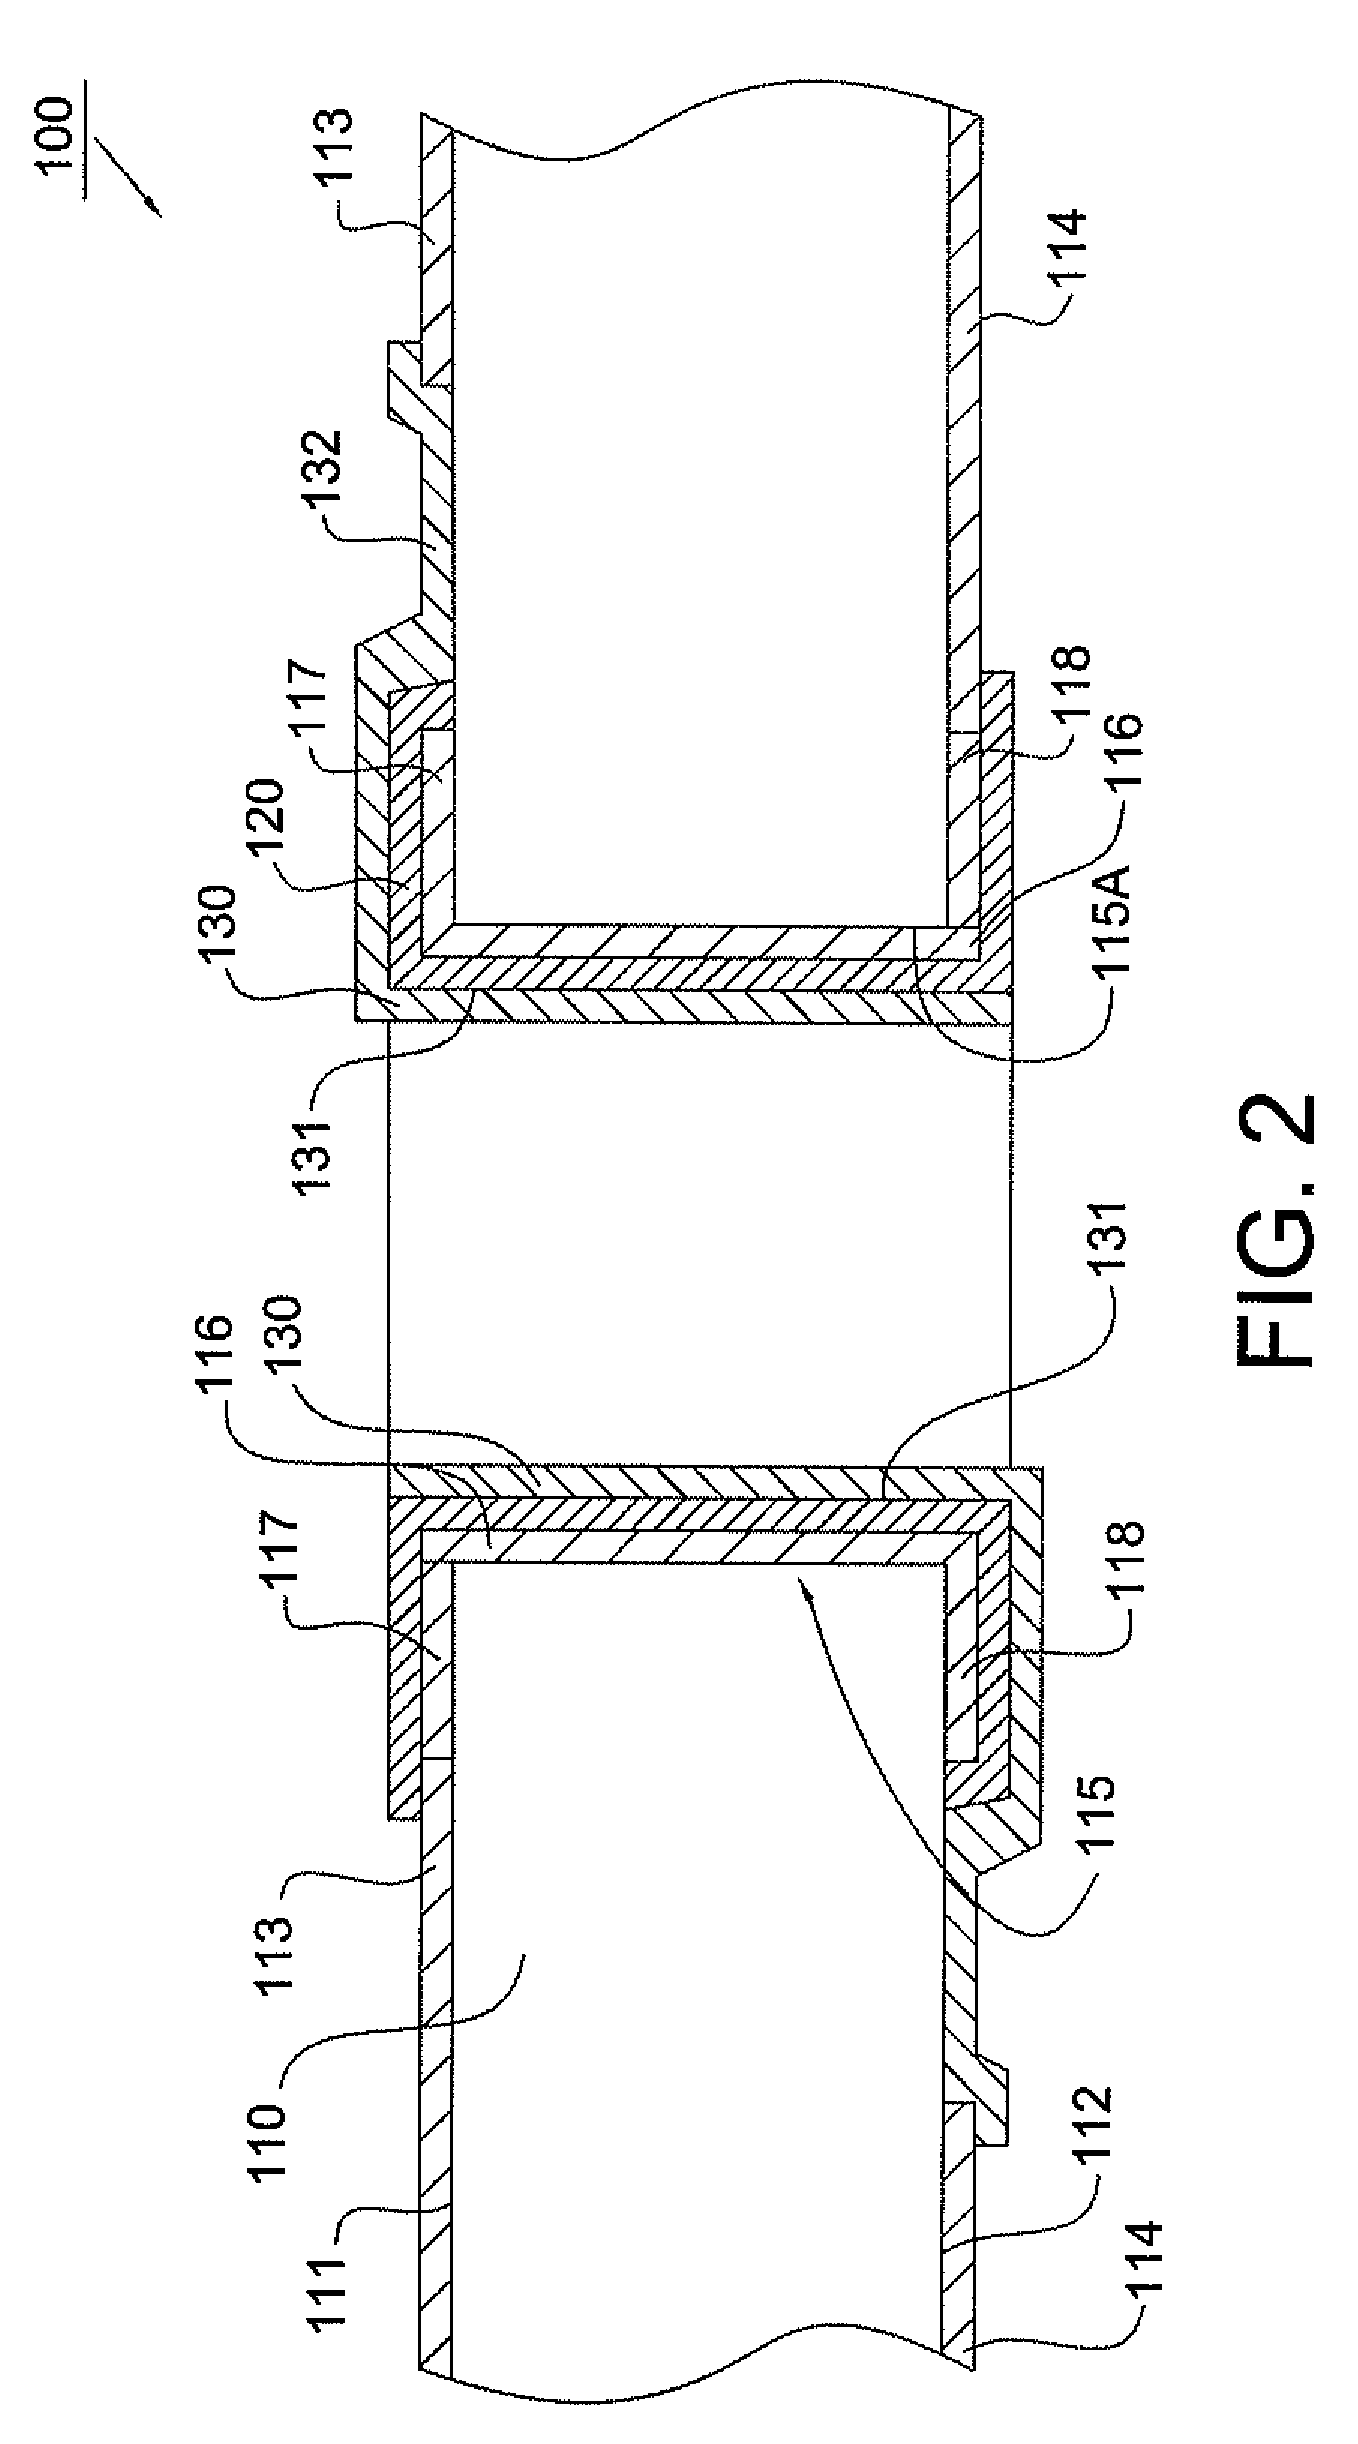 Substrate with multilayer plated through hole and method for forming the multilayer plated through hole